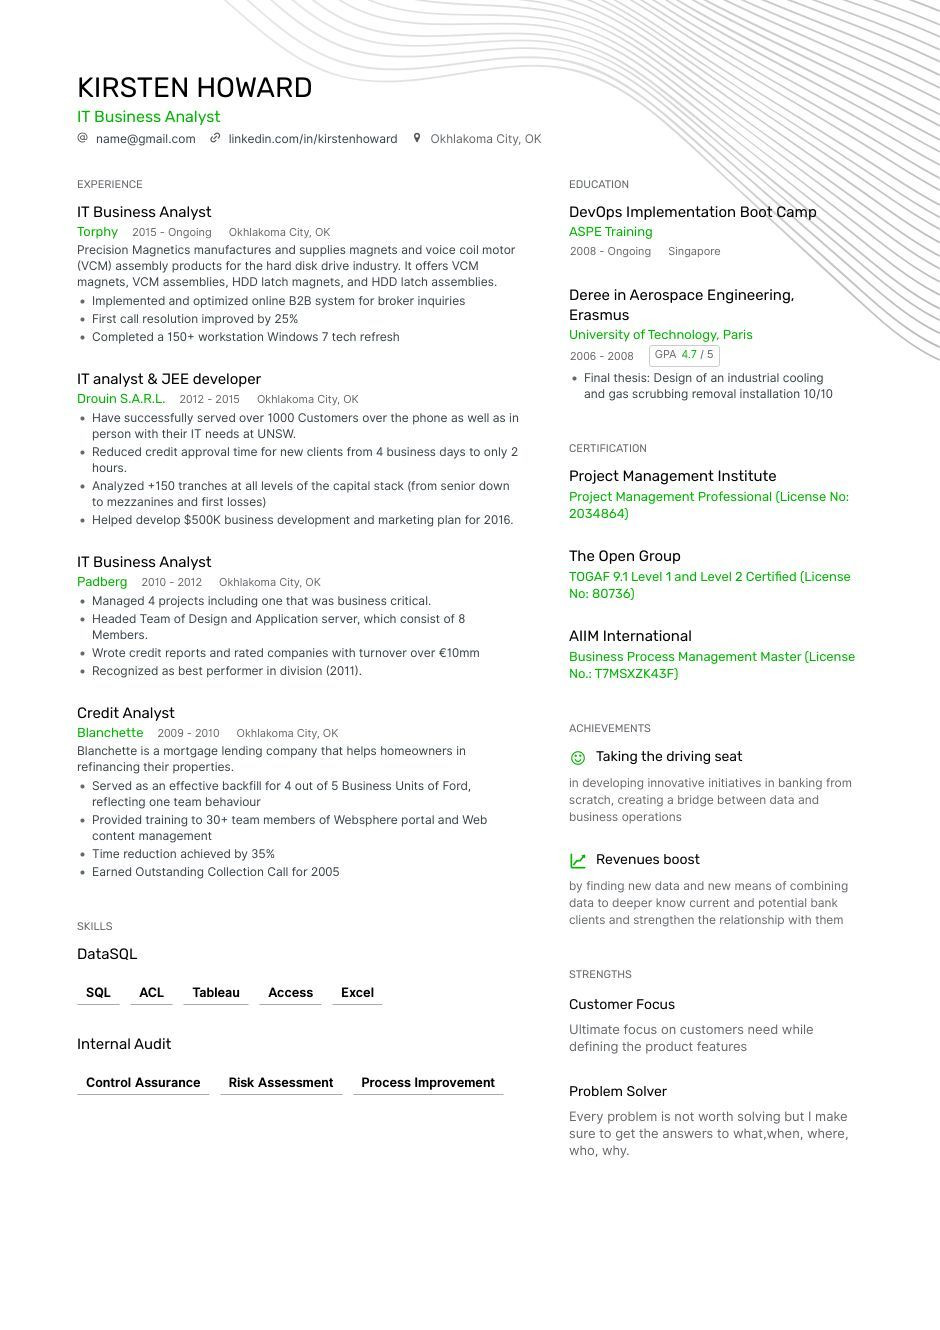 Vp Of Business Operations and Analytics Resume Sample the Best Business Analyst Resume Examples & Guide for 2022 (layout …